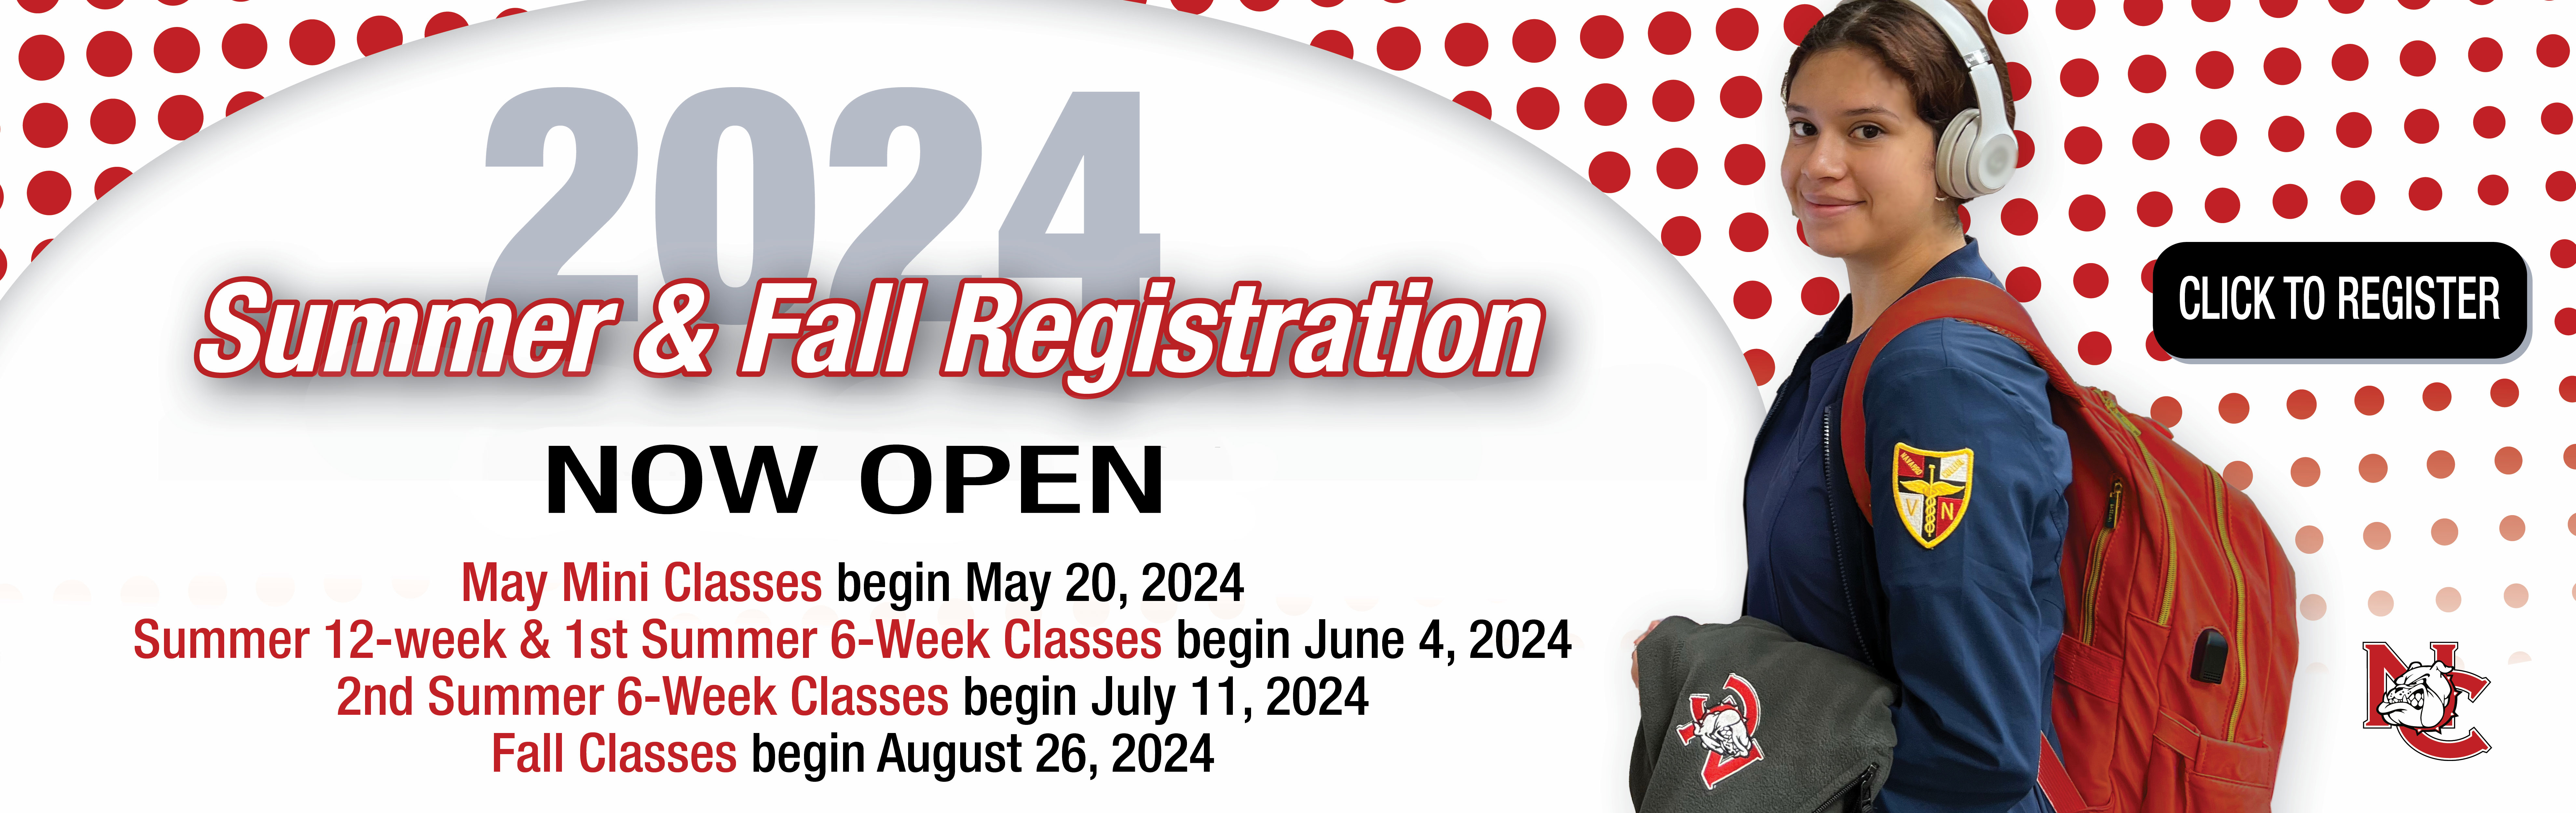 Summer and Fall 2024 Registration